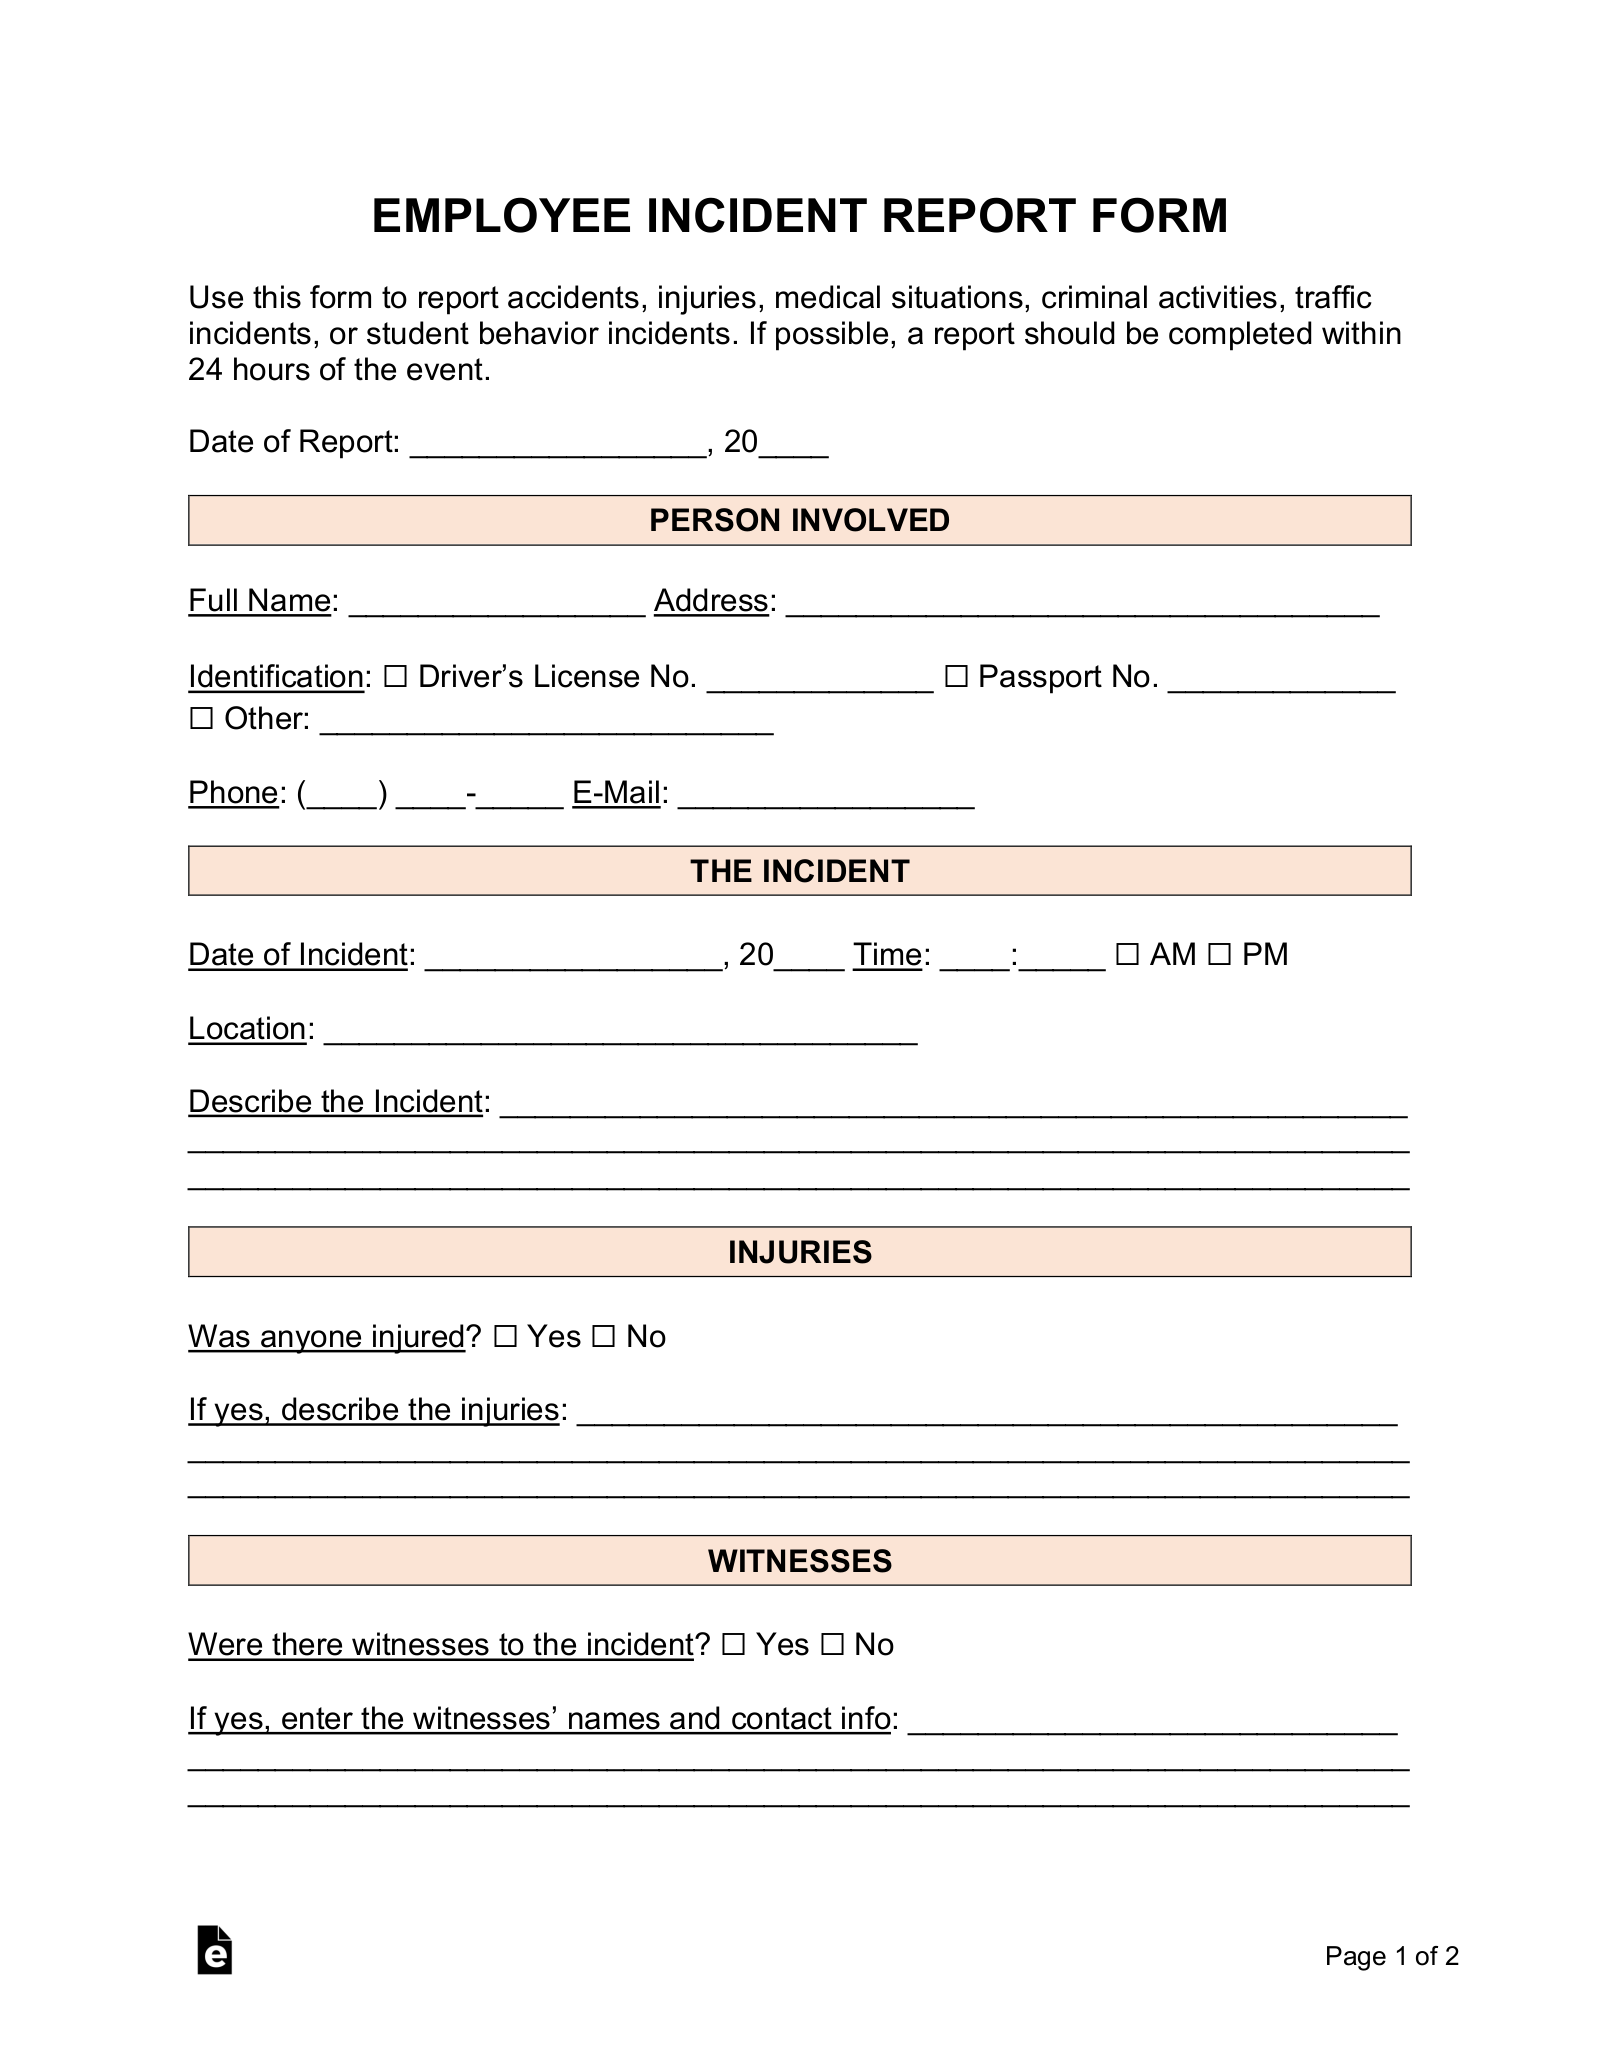 Free Employee Incident Report Template - PDF | Word – eForms